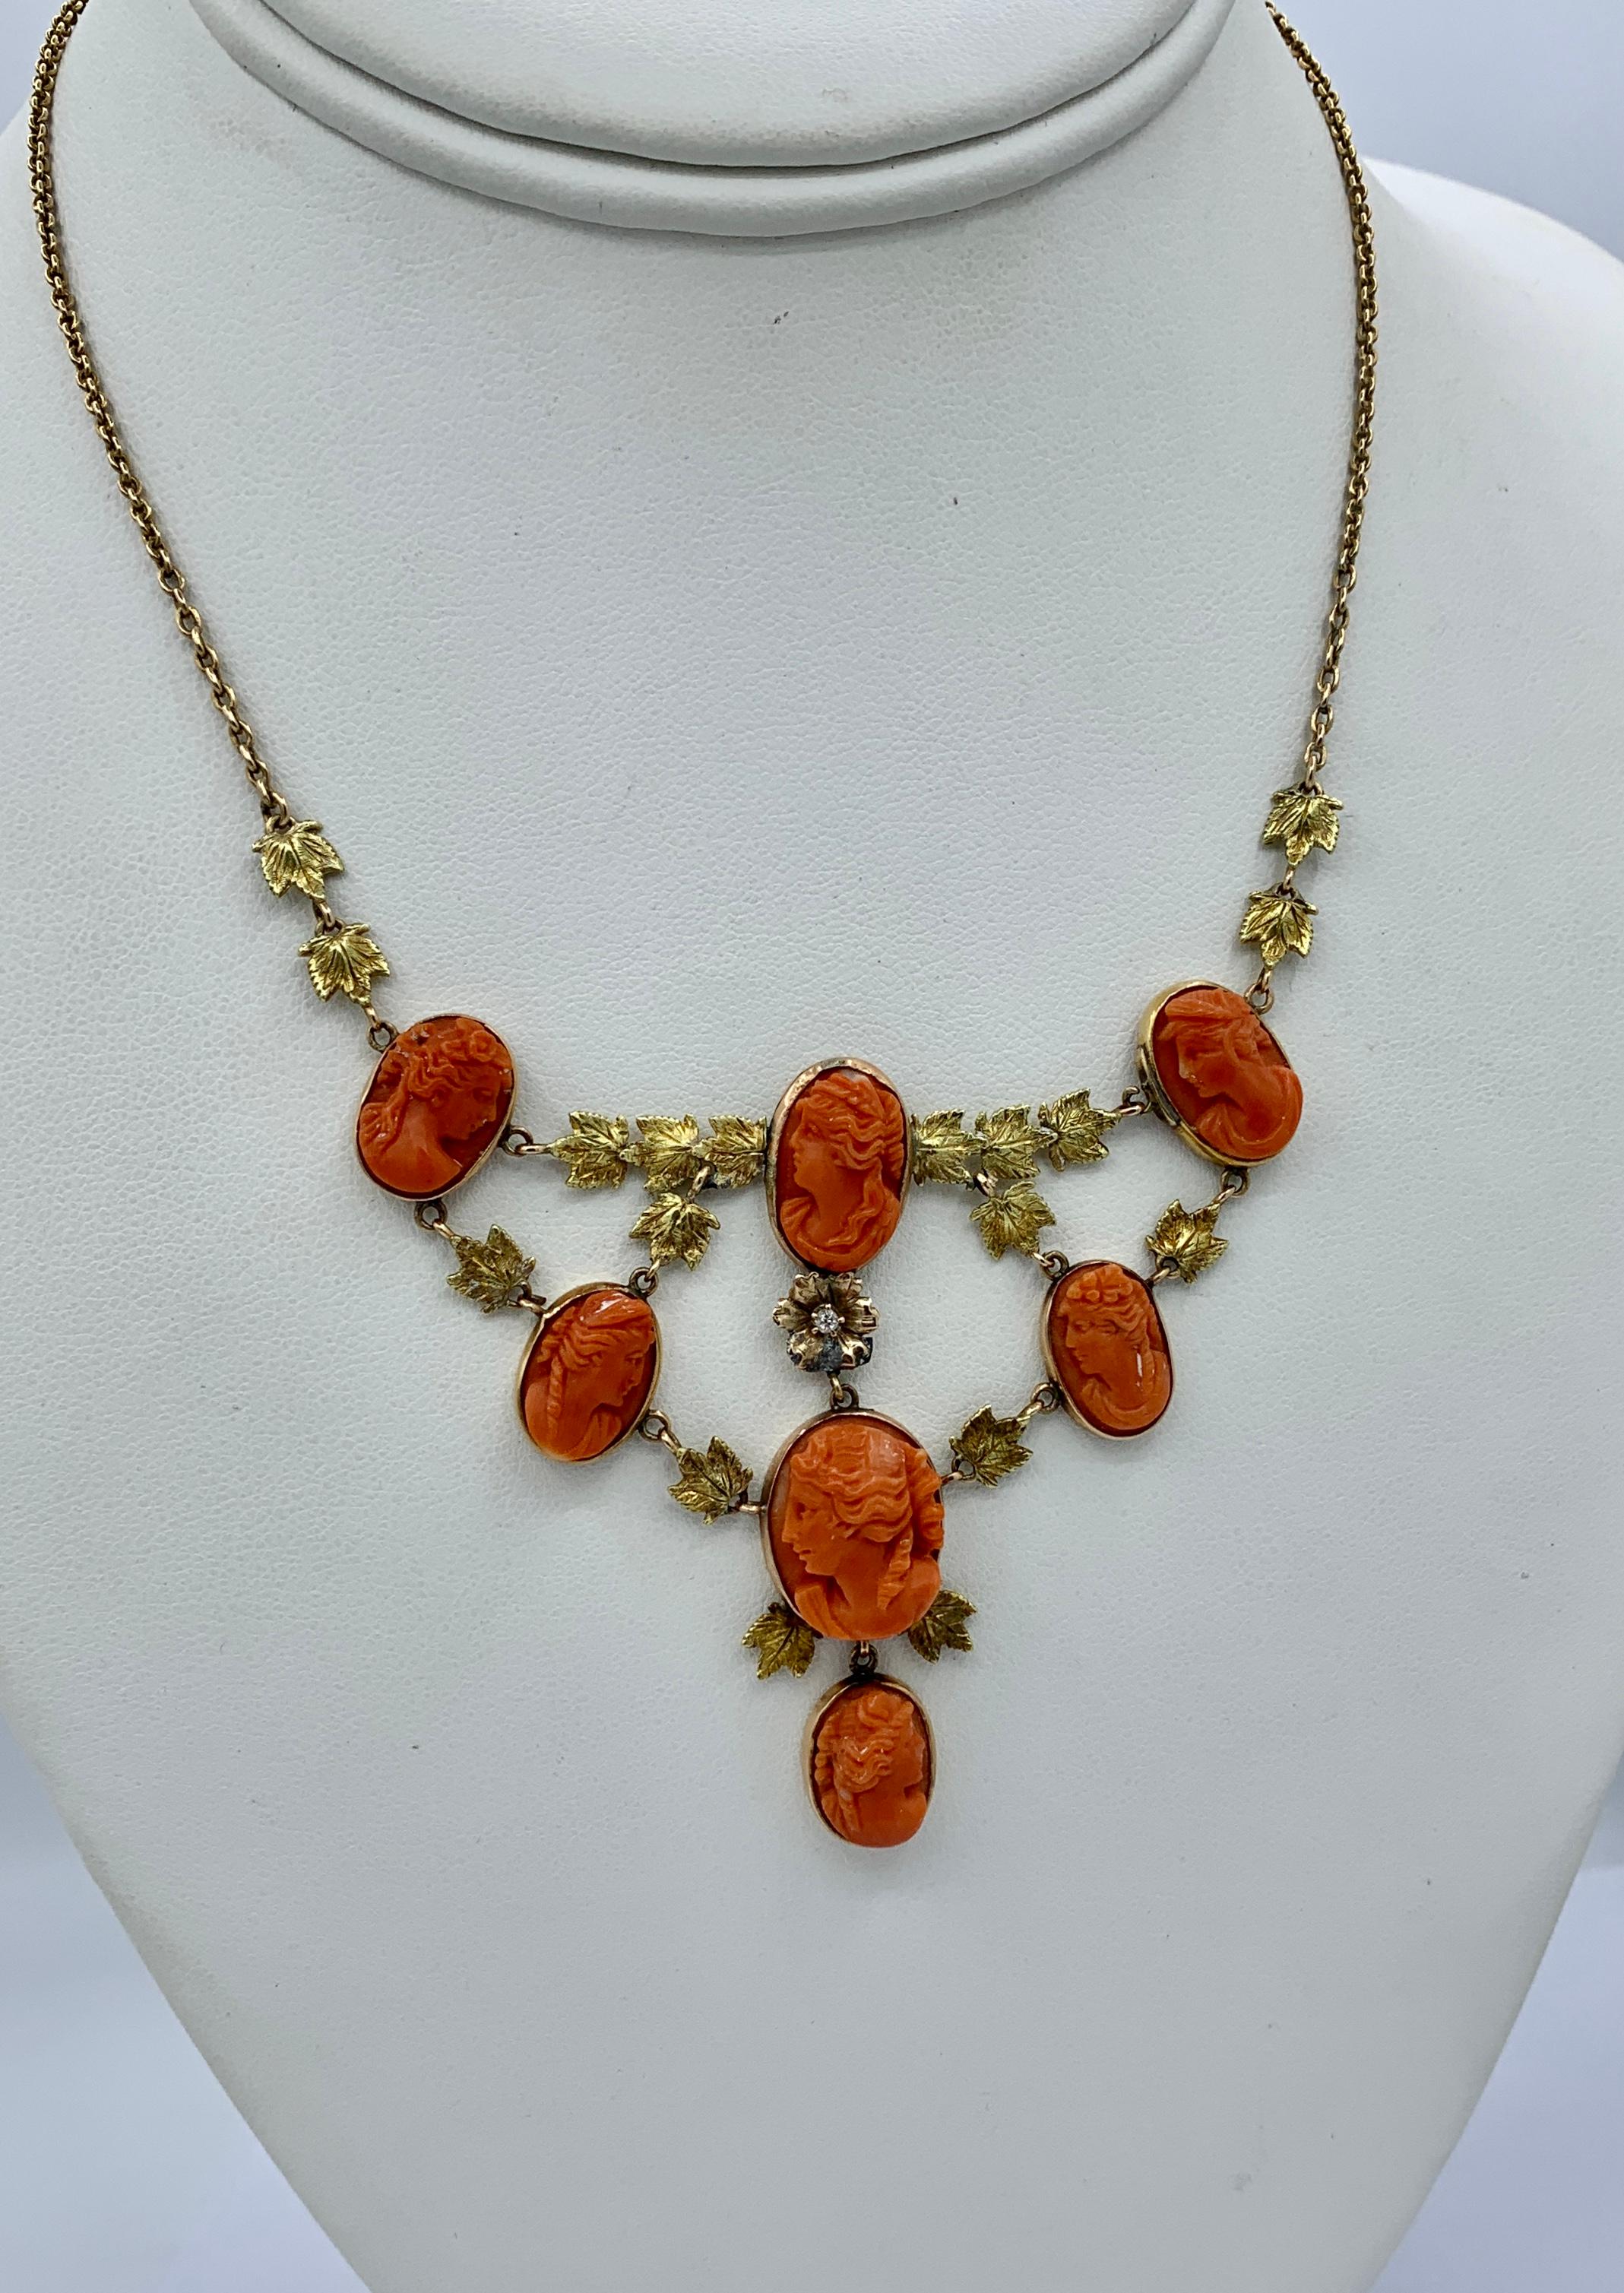 Women's Victorian Coral Cameo OMC Diamond Necklace 14 Karat Gold Neoclassical Goddess For Sale